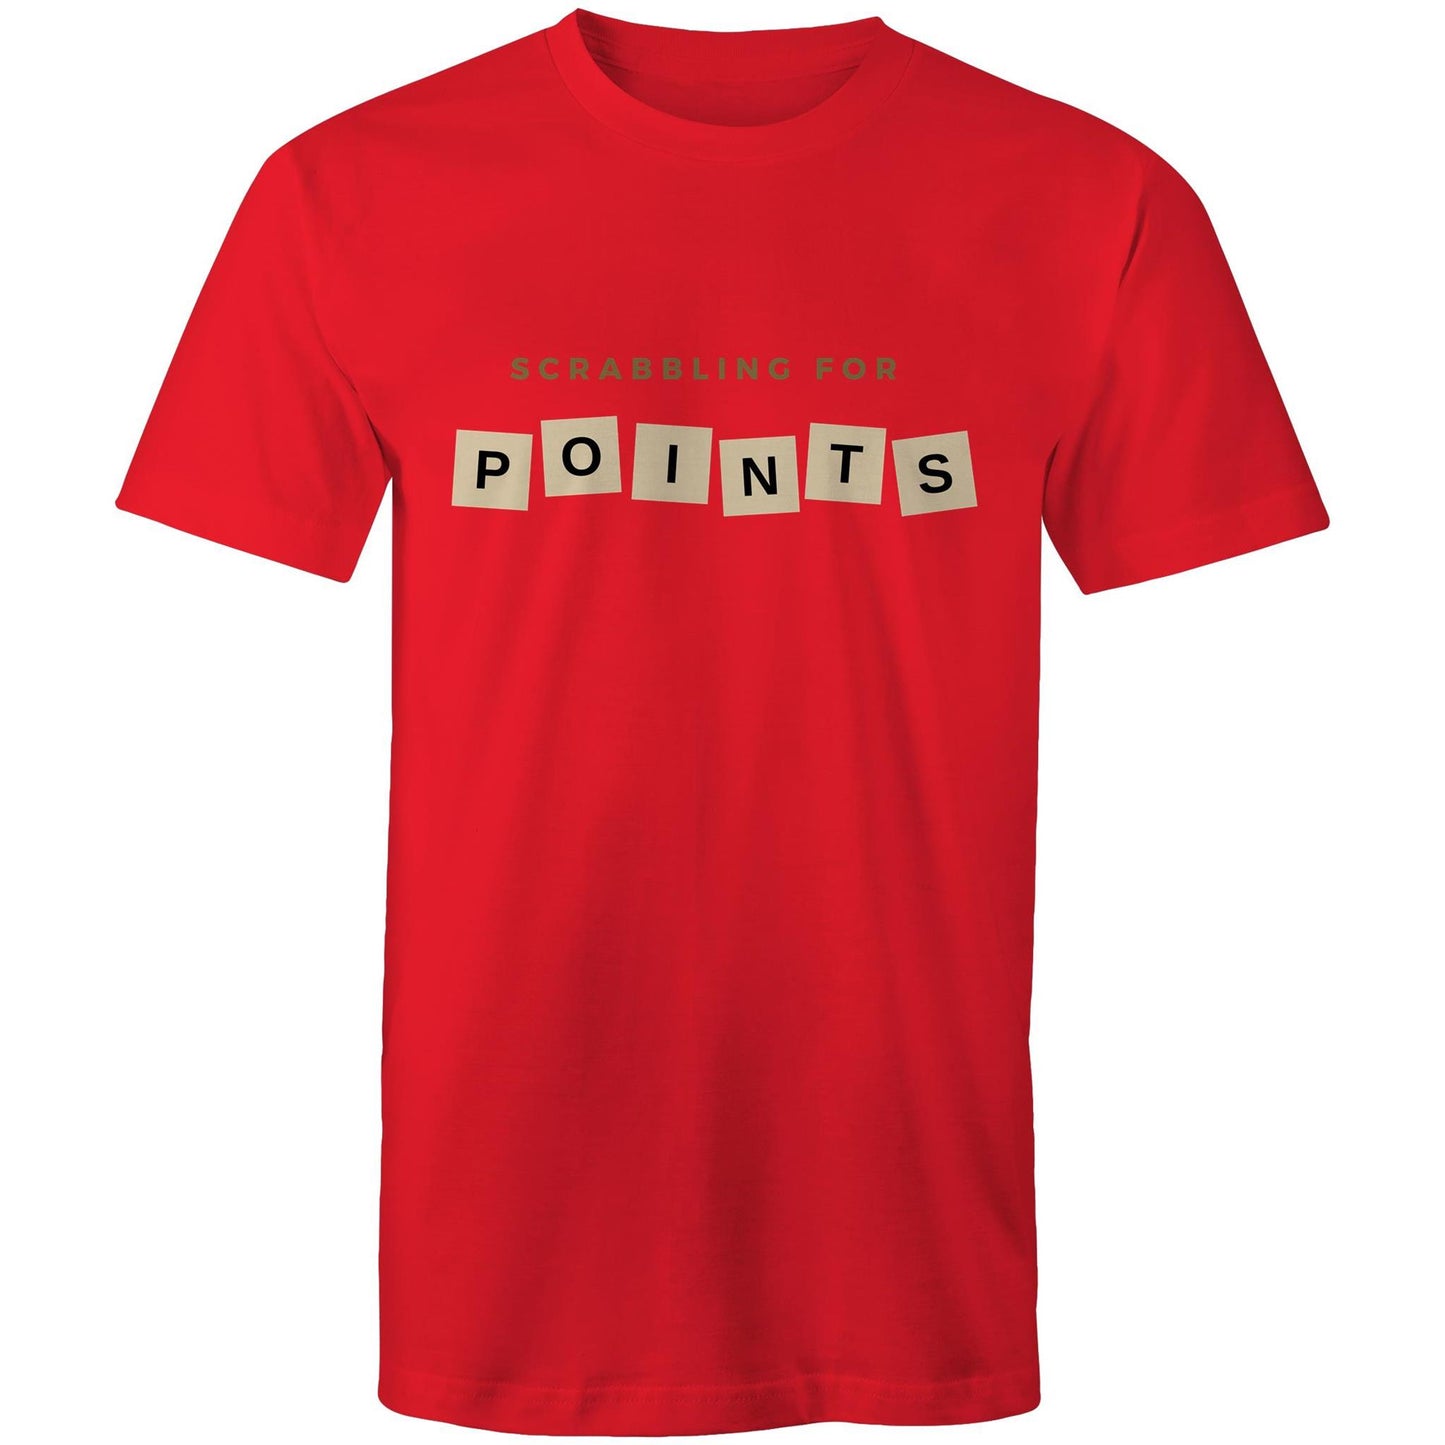 Scrabbling For Points - Mens T-Shirt Red Mens T-shirt Games